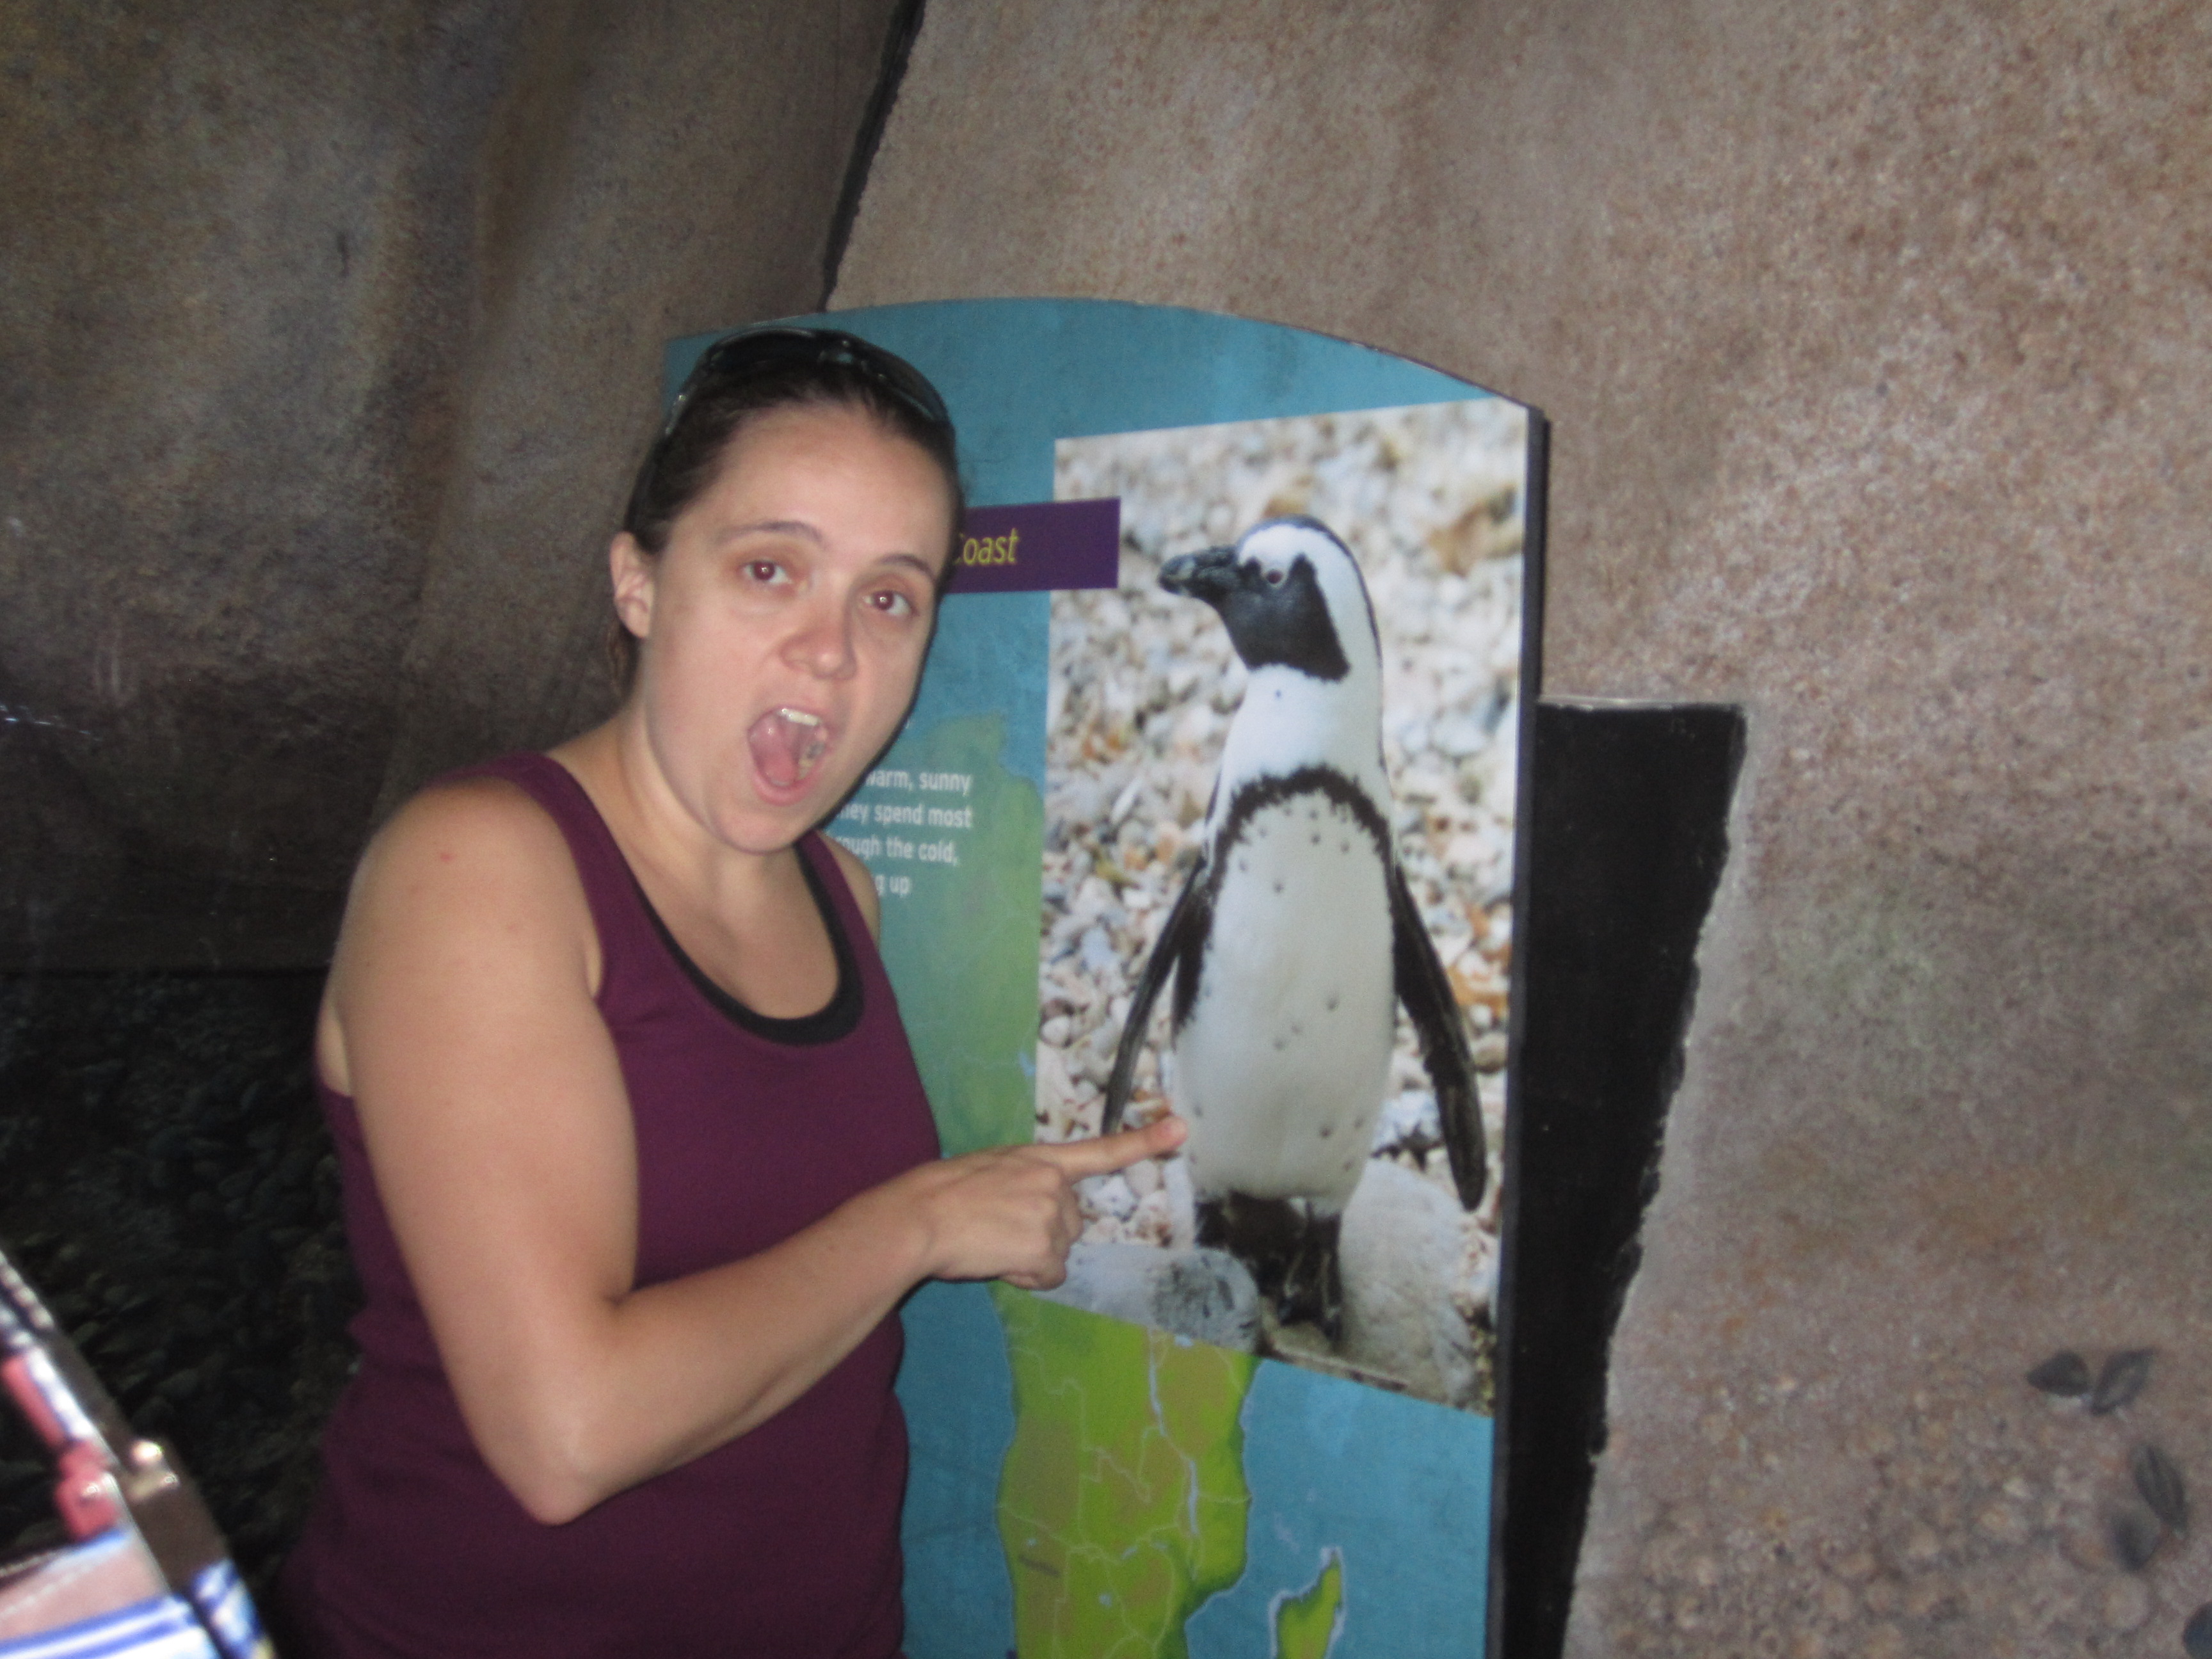 I told Jeanna there were penguins in Africa!!!